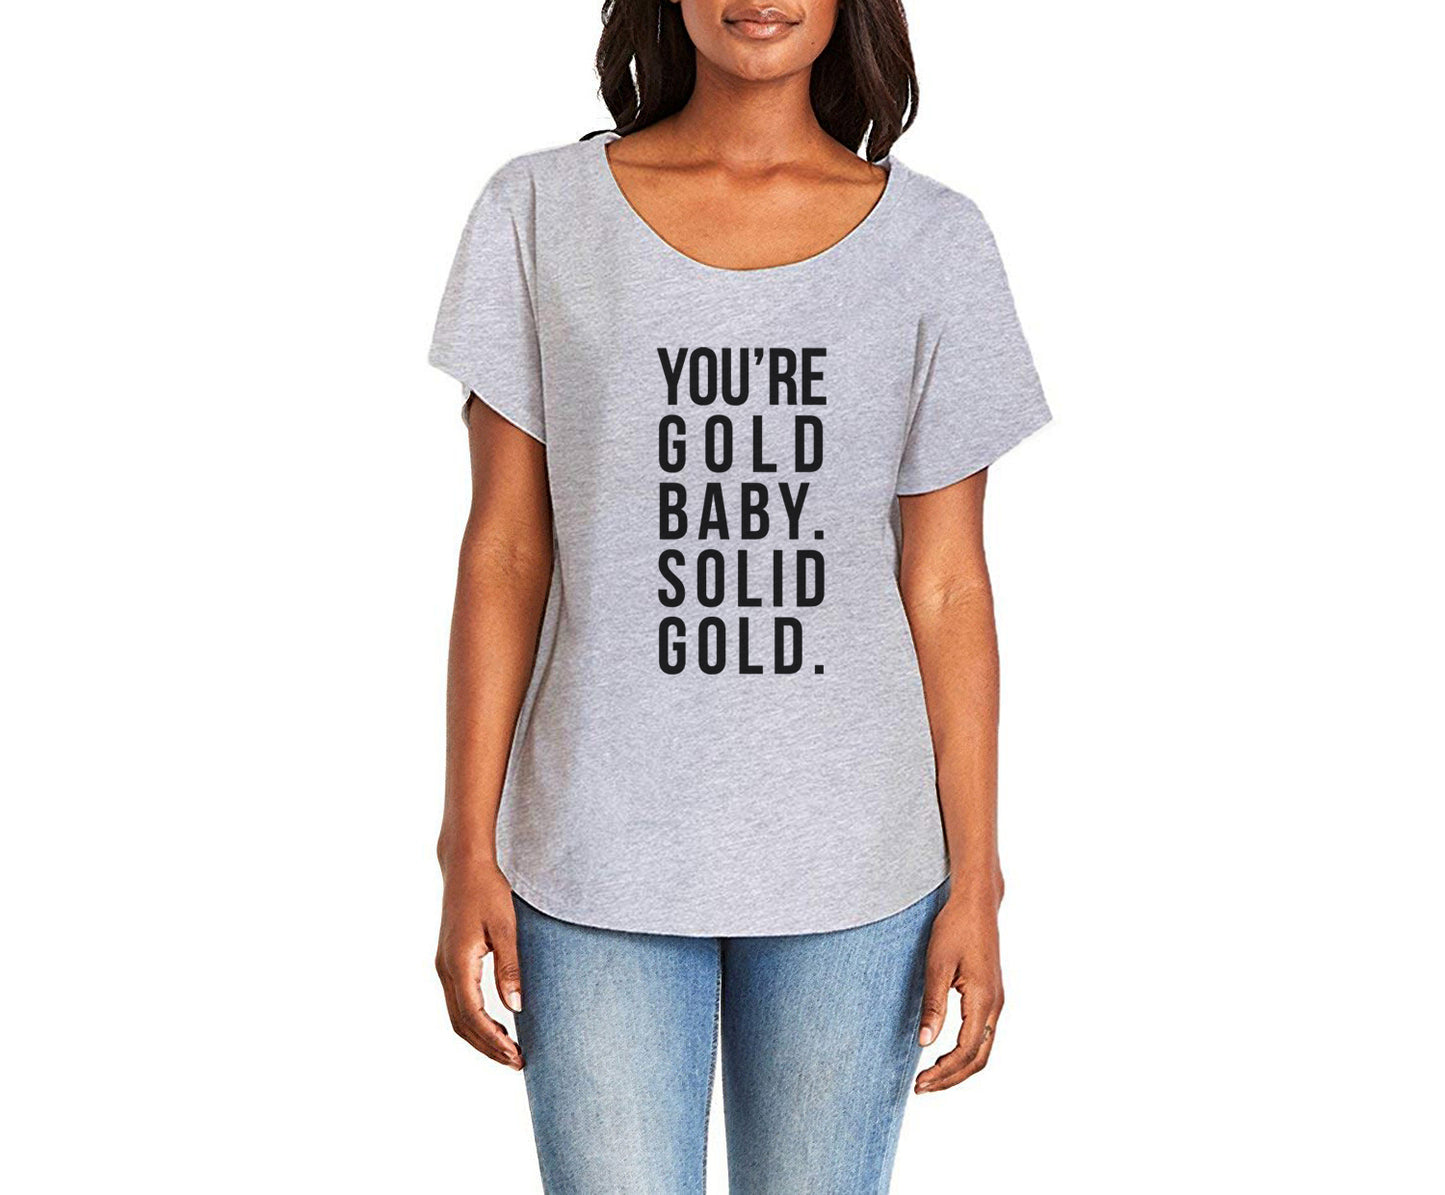 You're Gold Baby. Solid Gold. Ladies Tee Shirt - In Grey & White